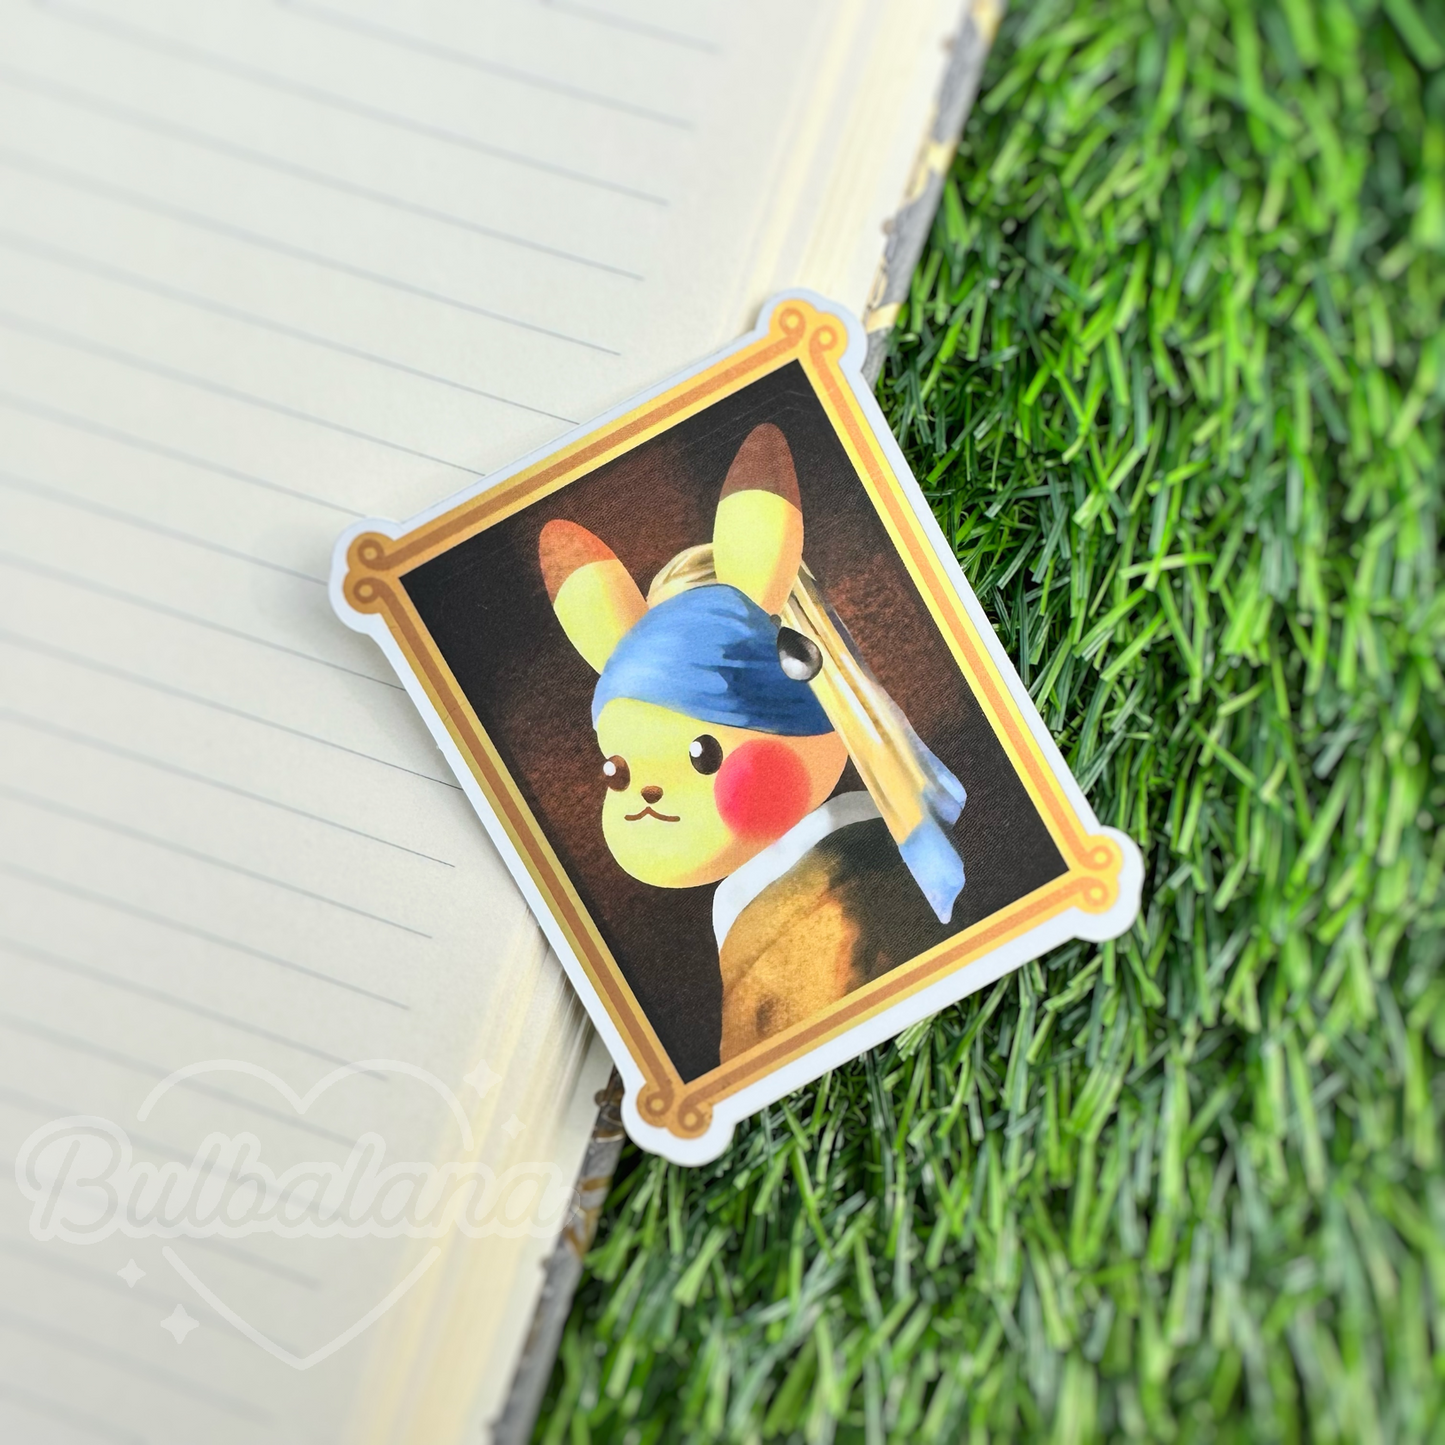 Pikachu with the Pearl Earring Sticker